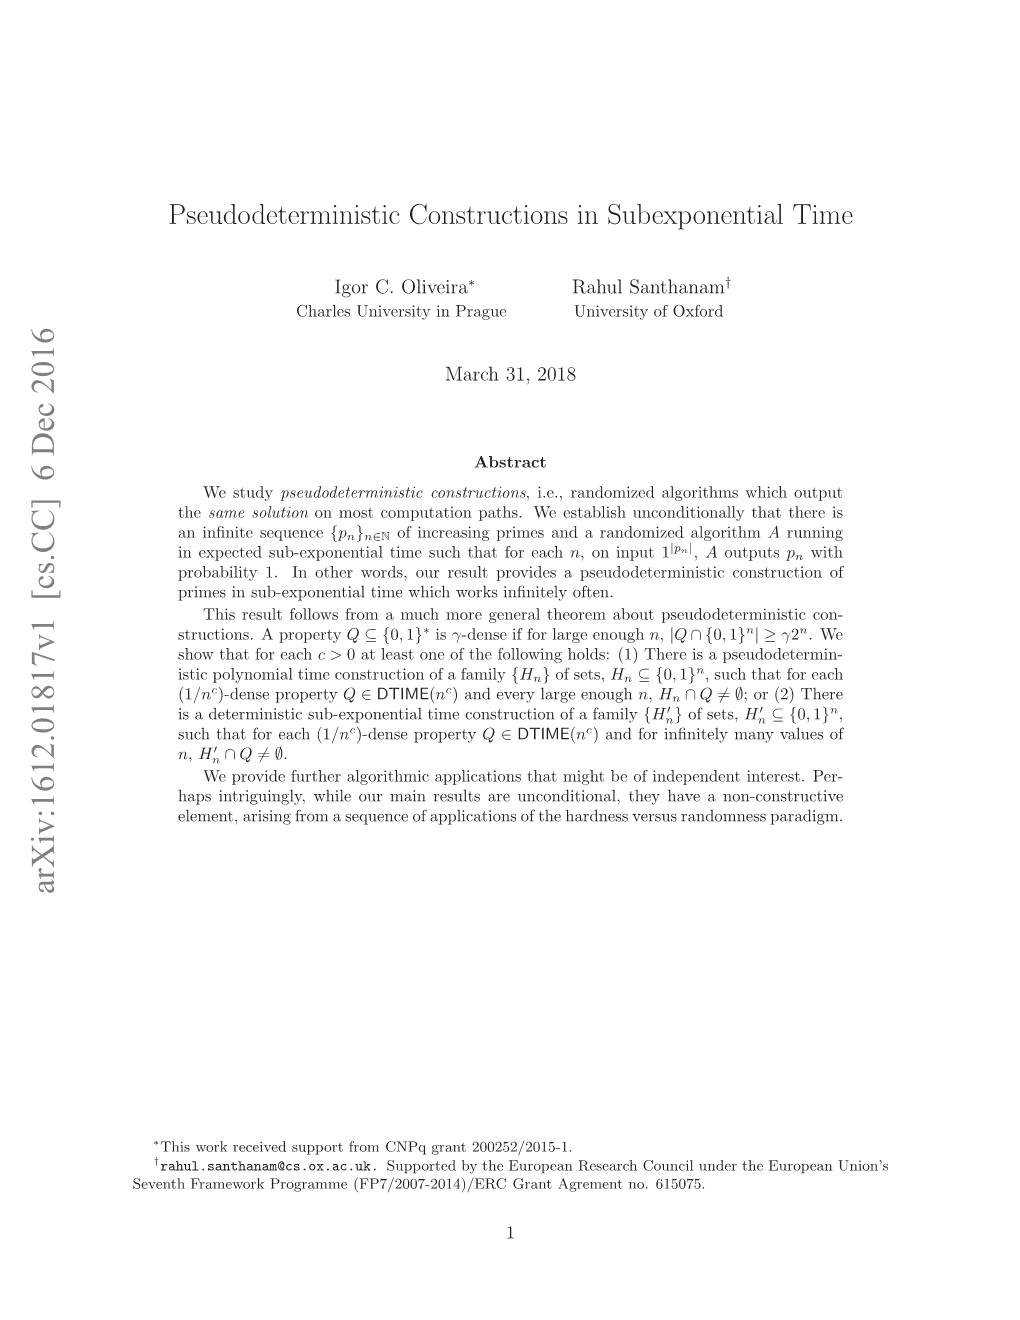 Pseudodeterministic Constructions in Subexponential Time